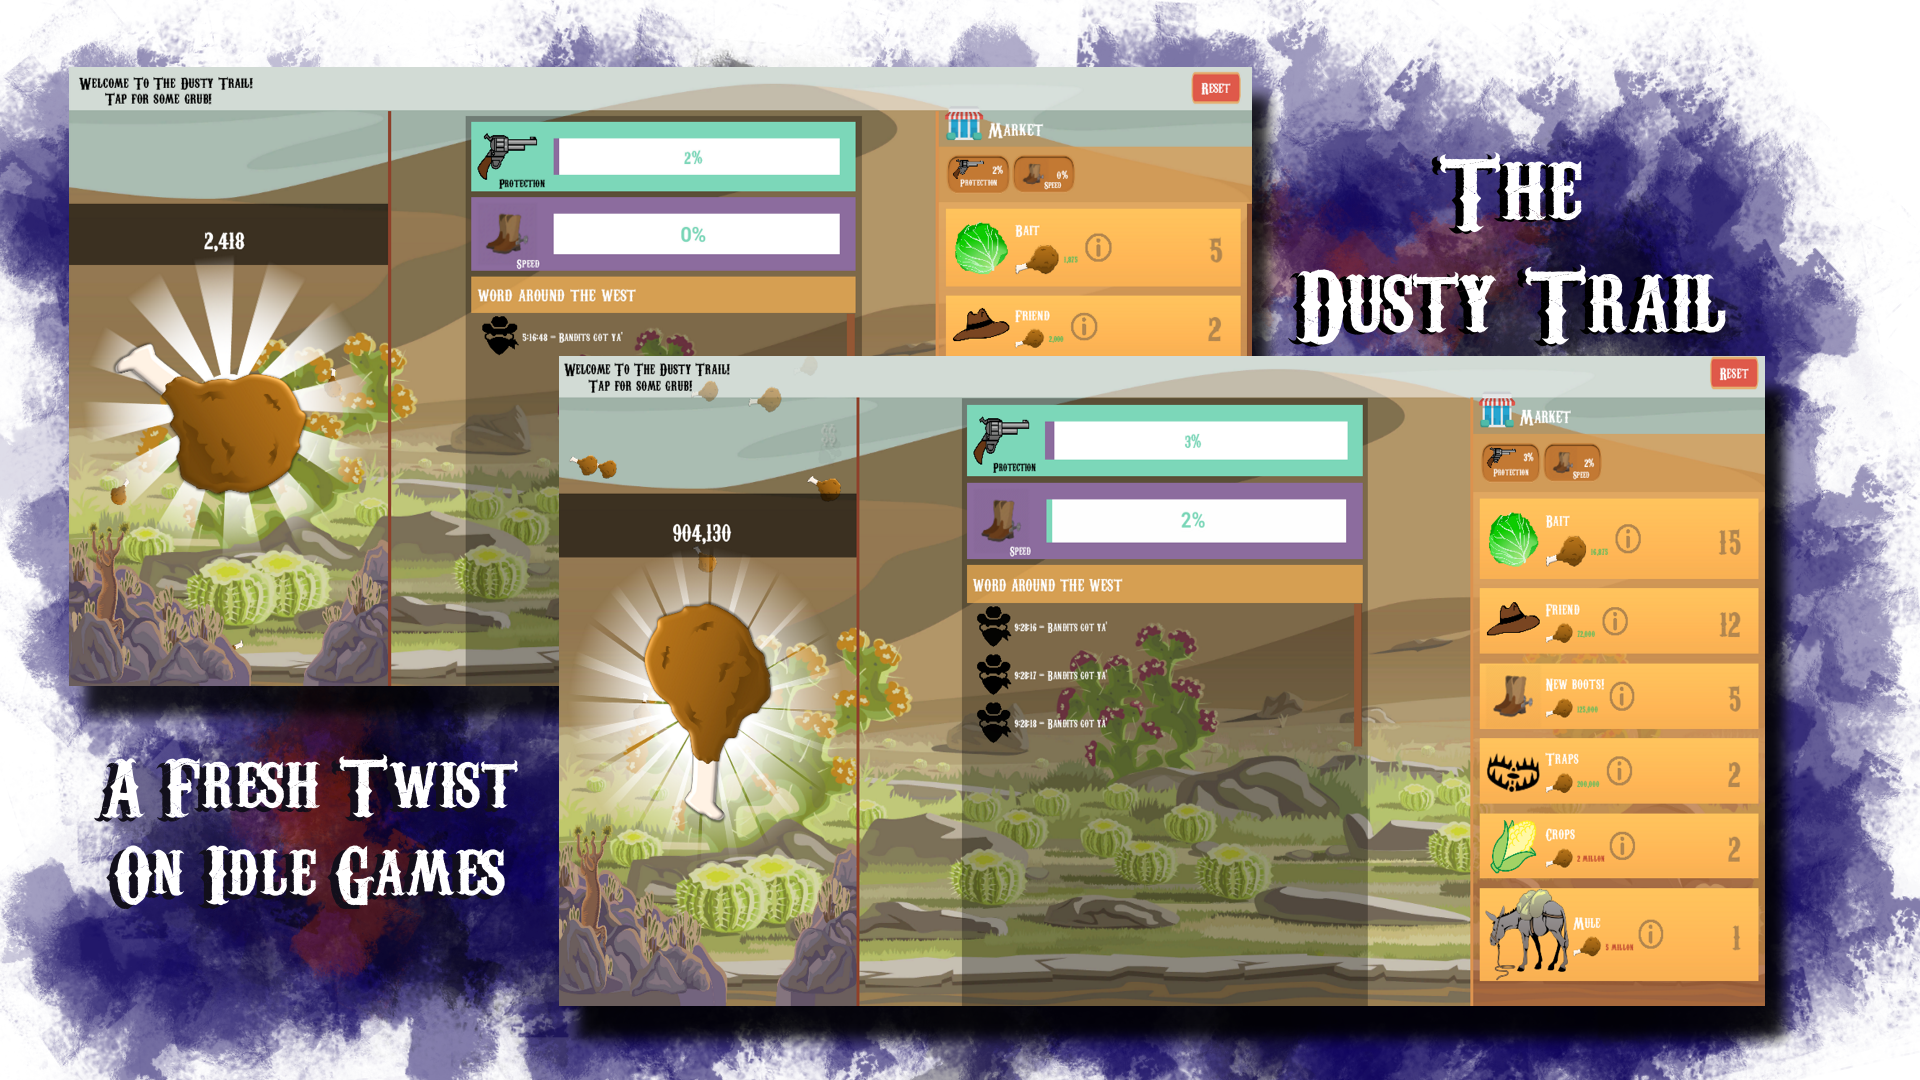 The Dusty Trail